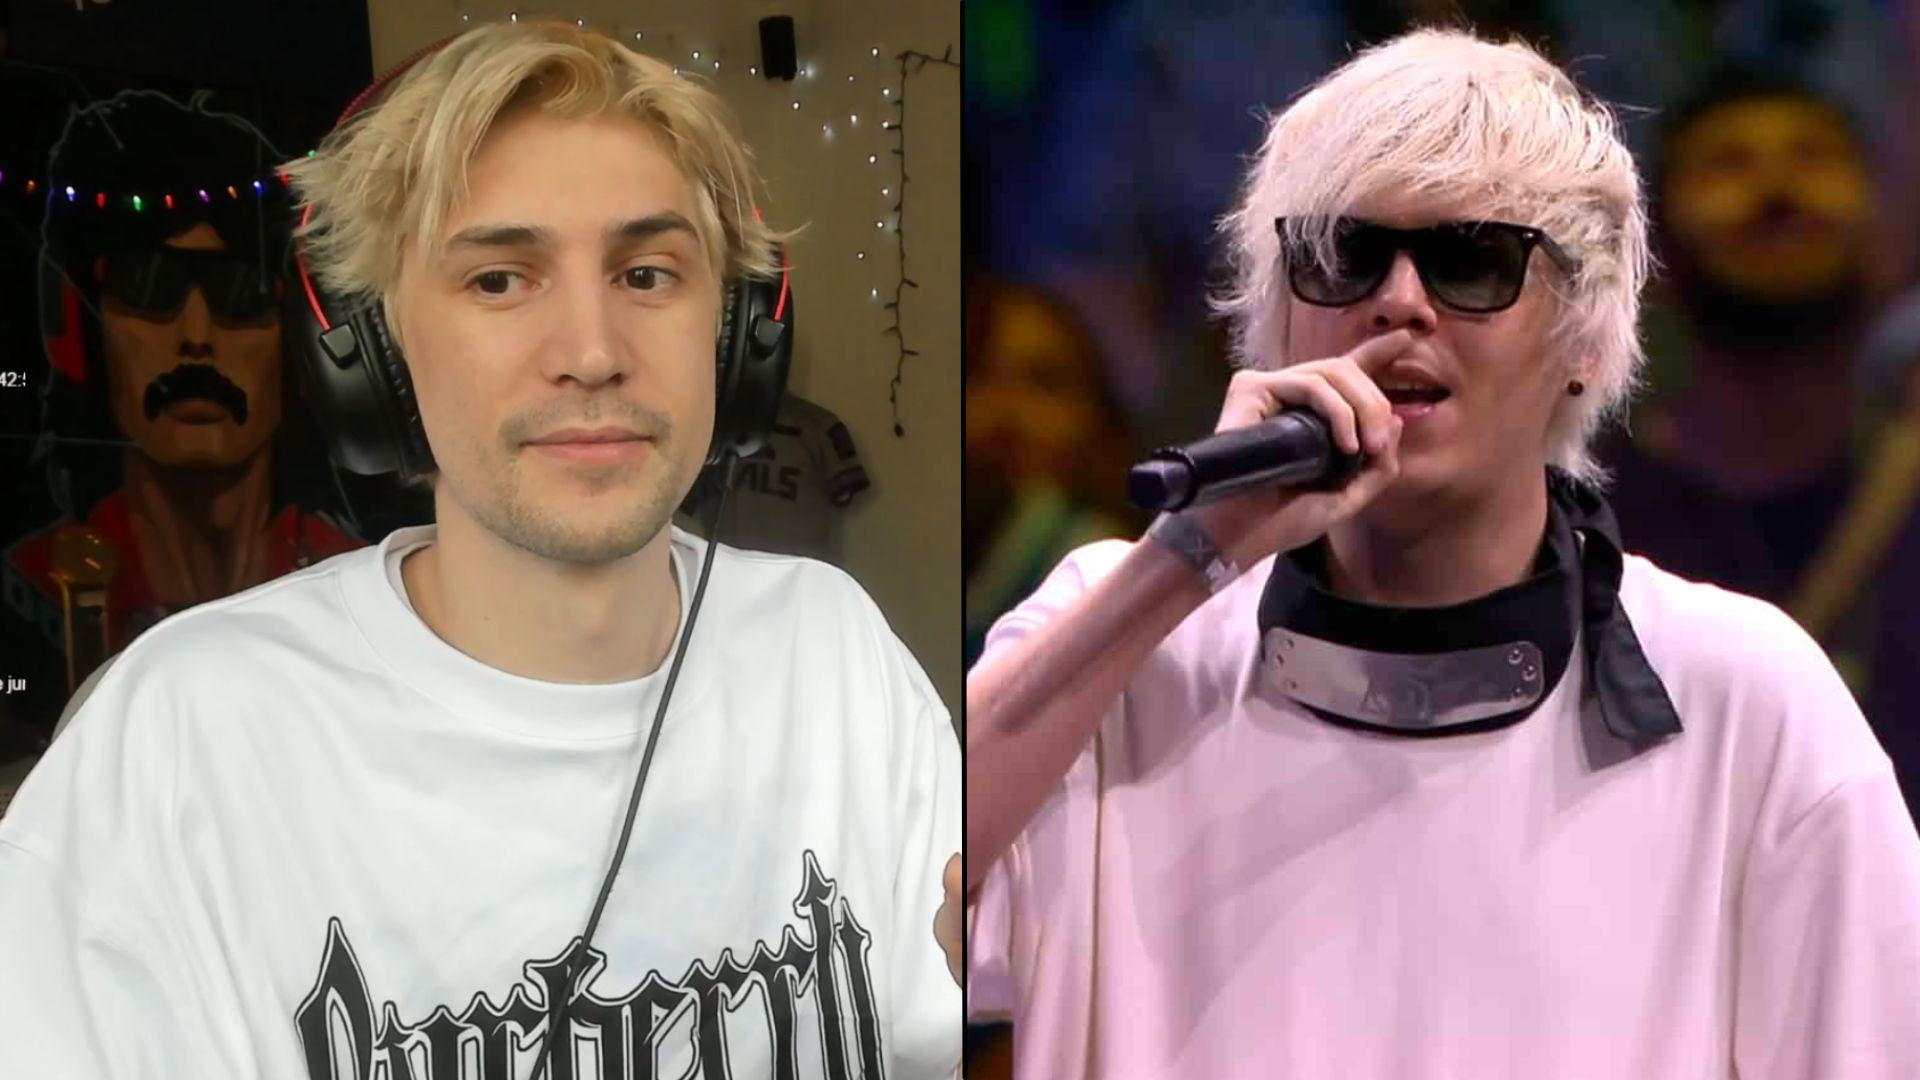 xQc and Rubius side by side in white t-shirts talking to camera